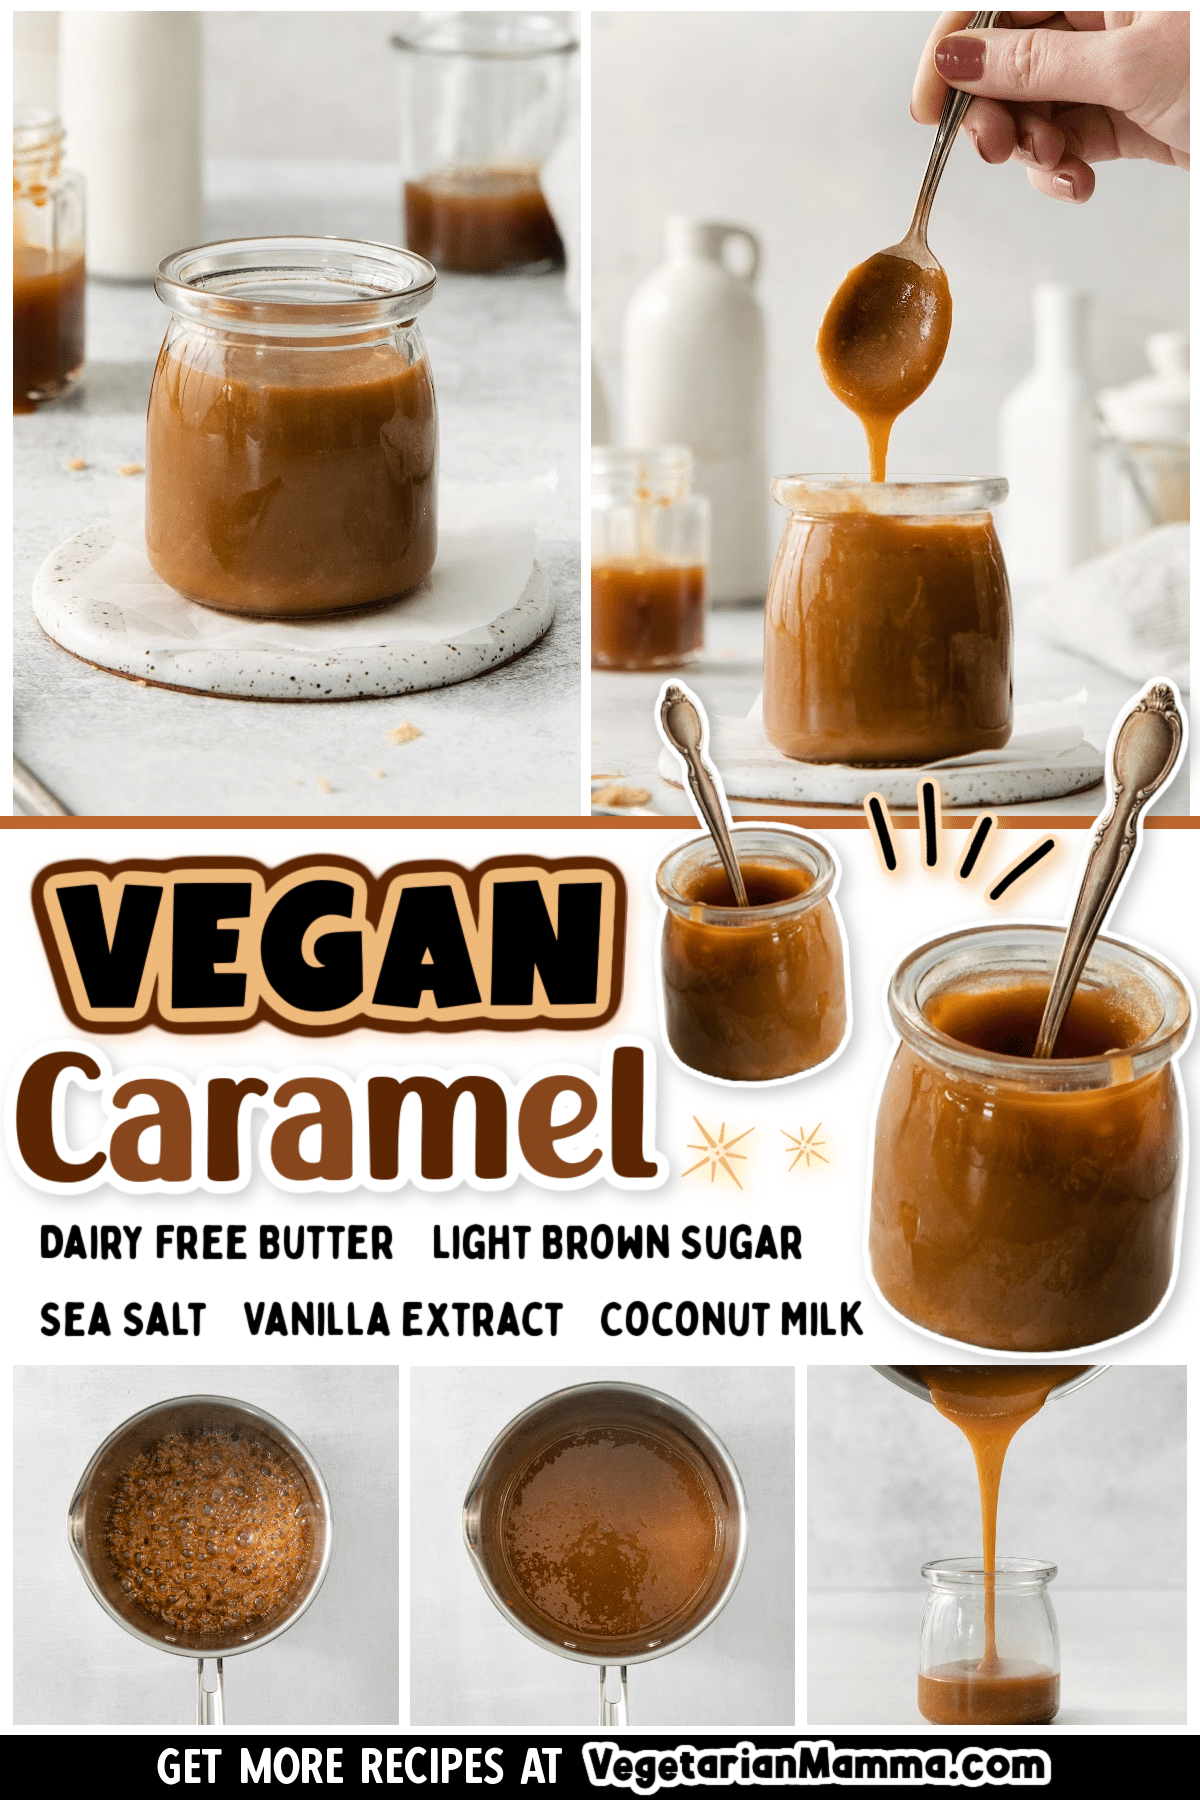 Vegan Caramel Sauce is a no-fuss, dairy free, and deliciously thick recipe that is perfect for pouring over ice cream, making vegan desserts, or sweetening your coffee!